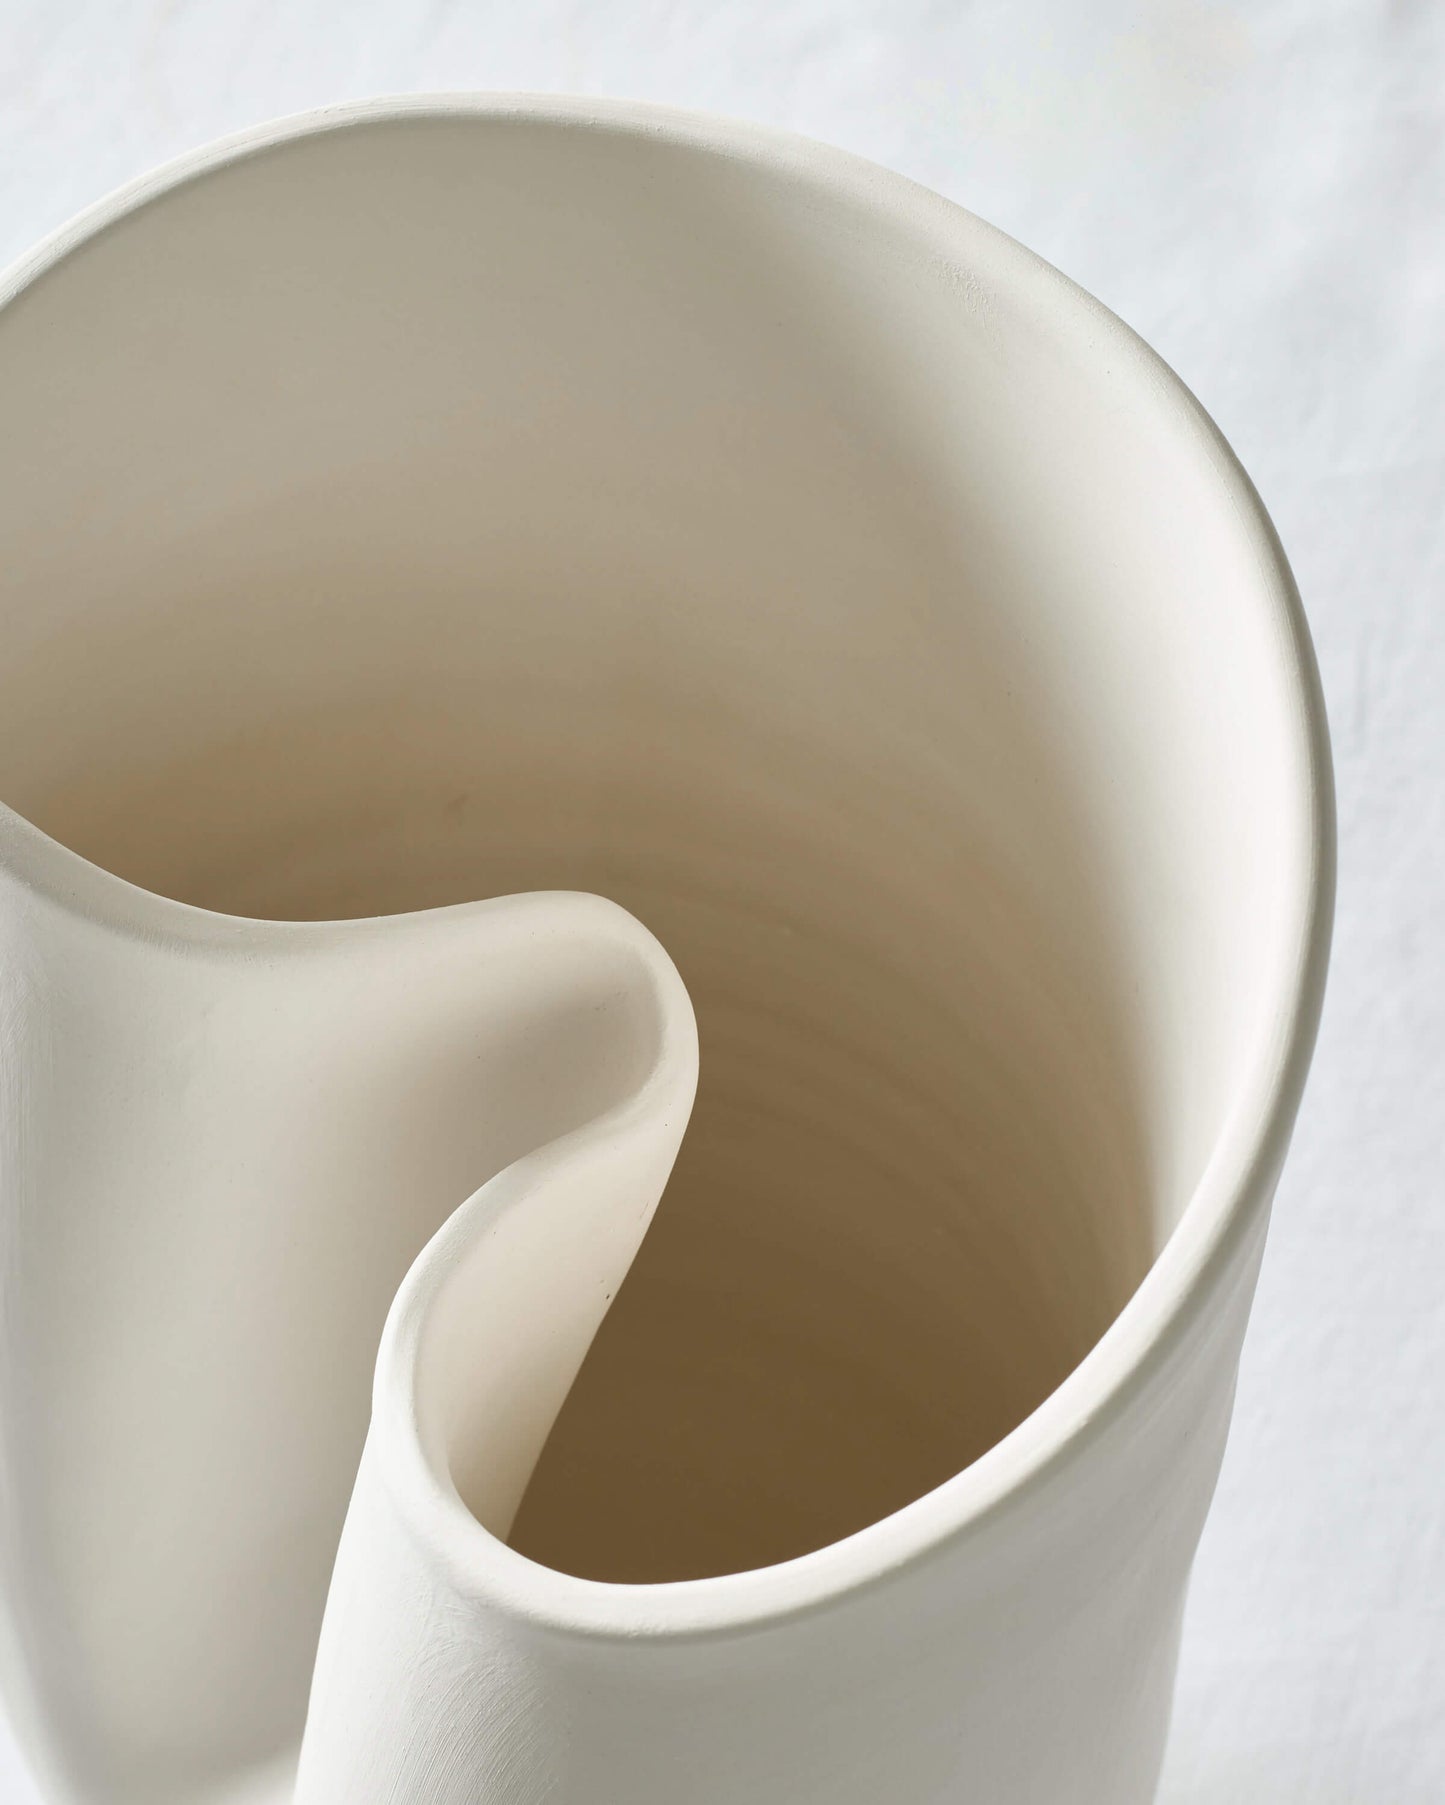 
                  
                    Close-up of the large Zoya Vase's curved edge detail and sculptural design.
                  
                